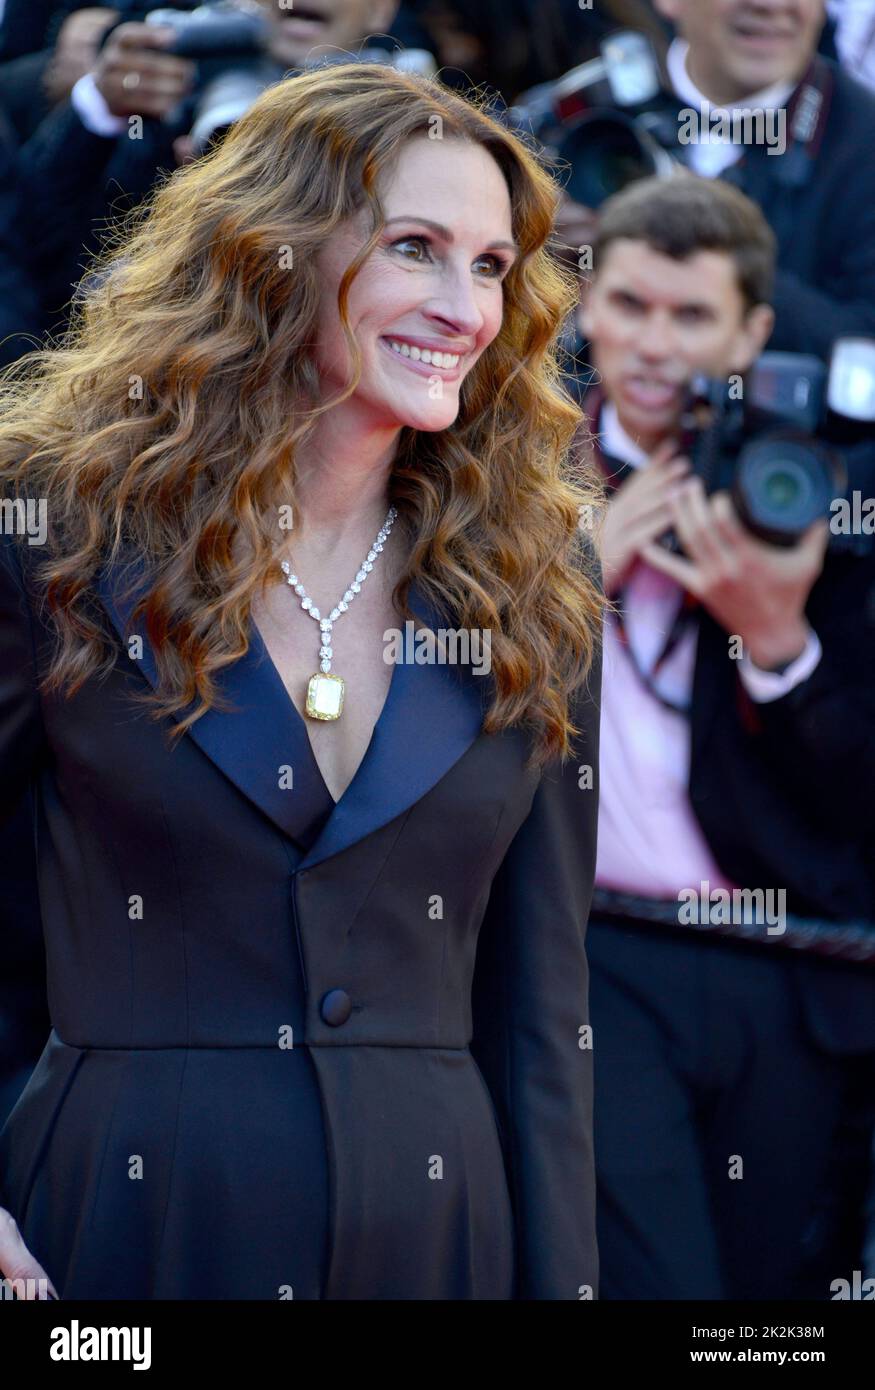 Cannes Film Festival 2022: Julia Roberts in Louis Vuitton at the